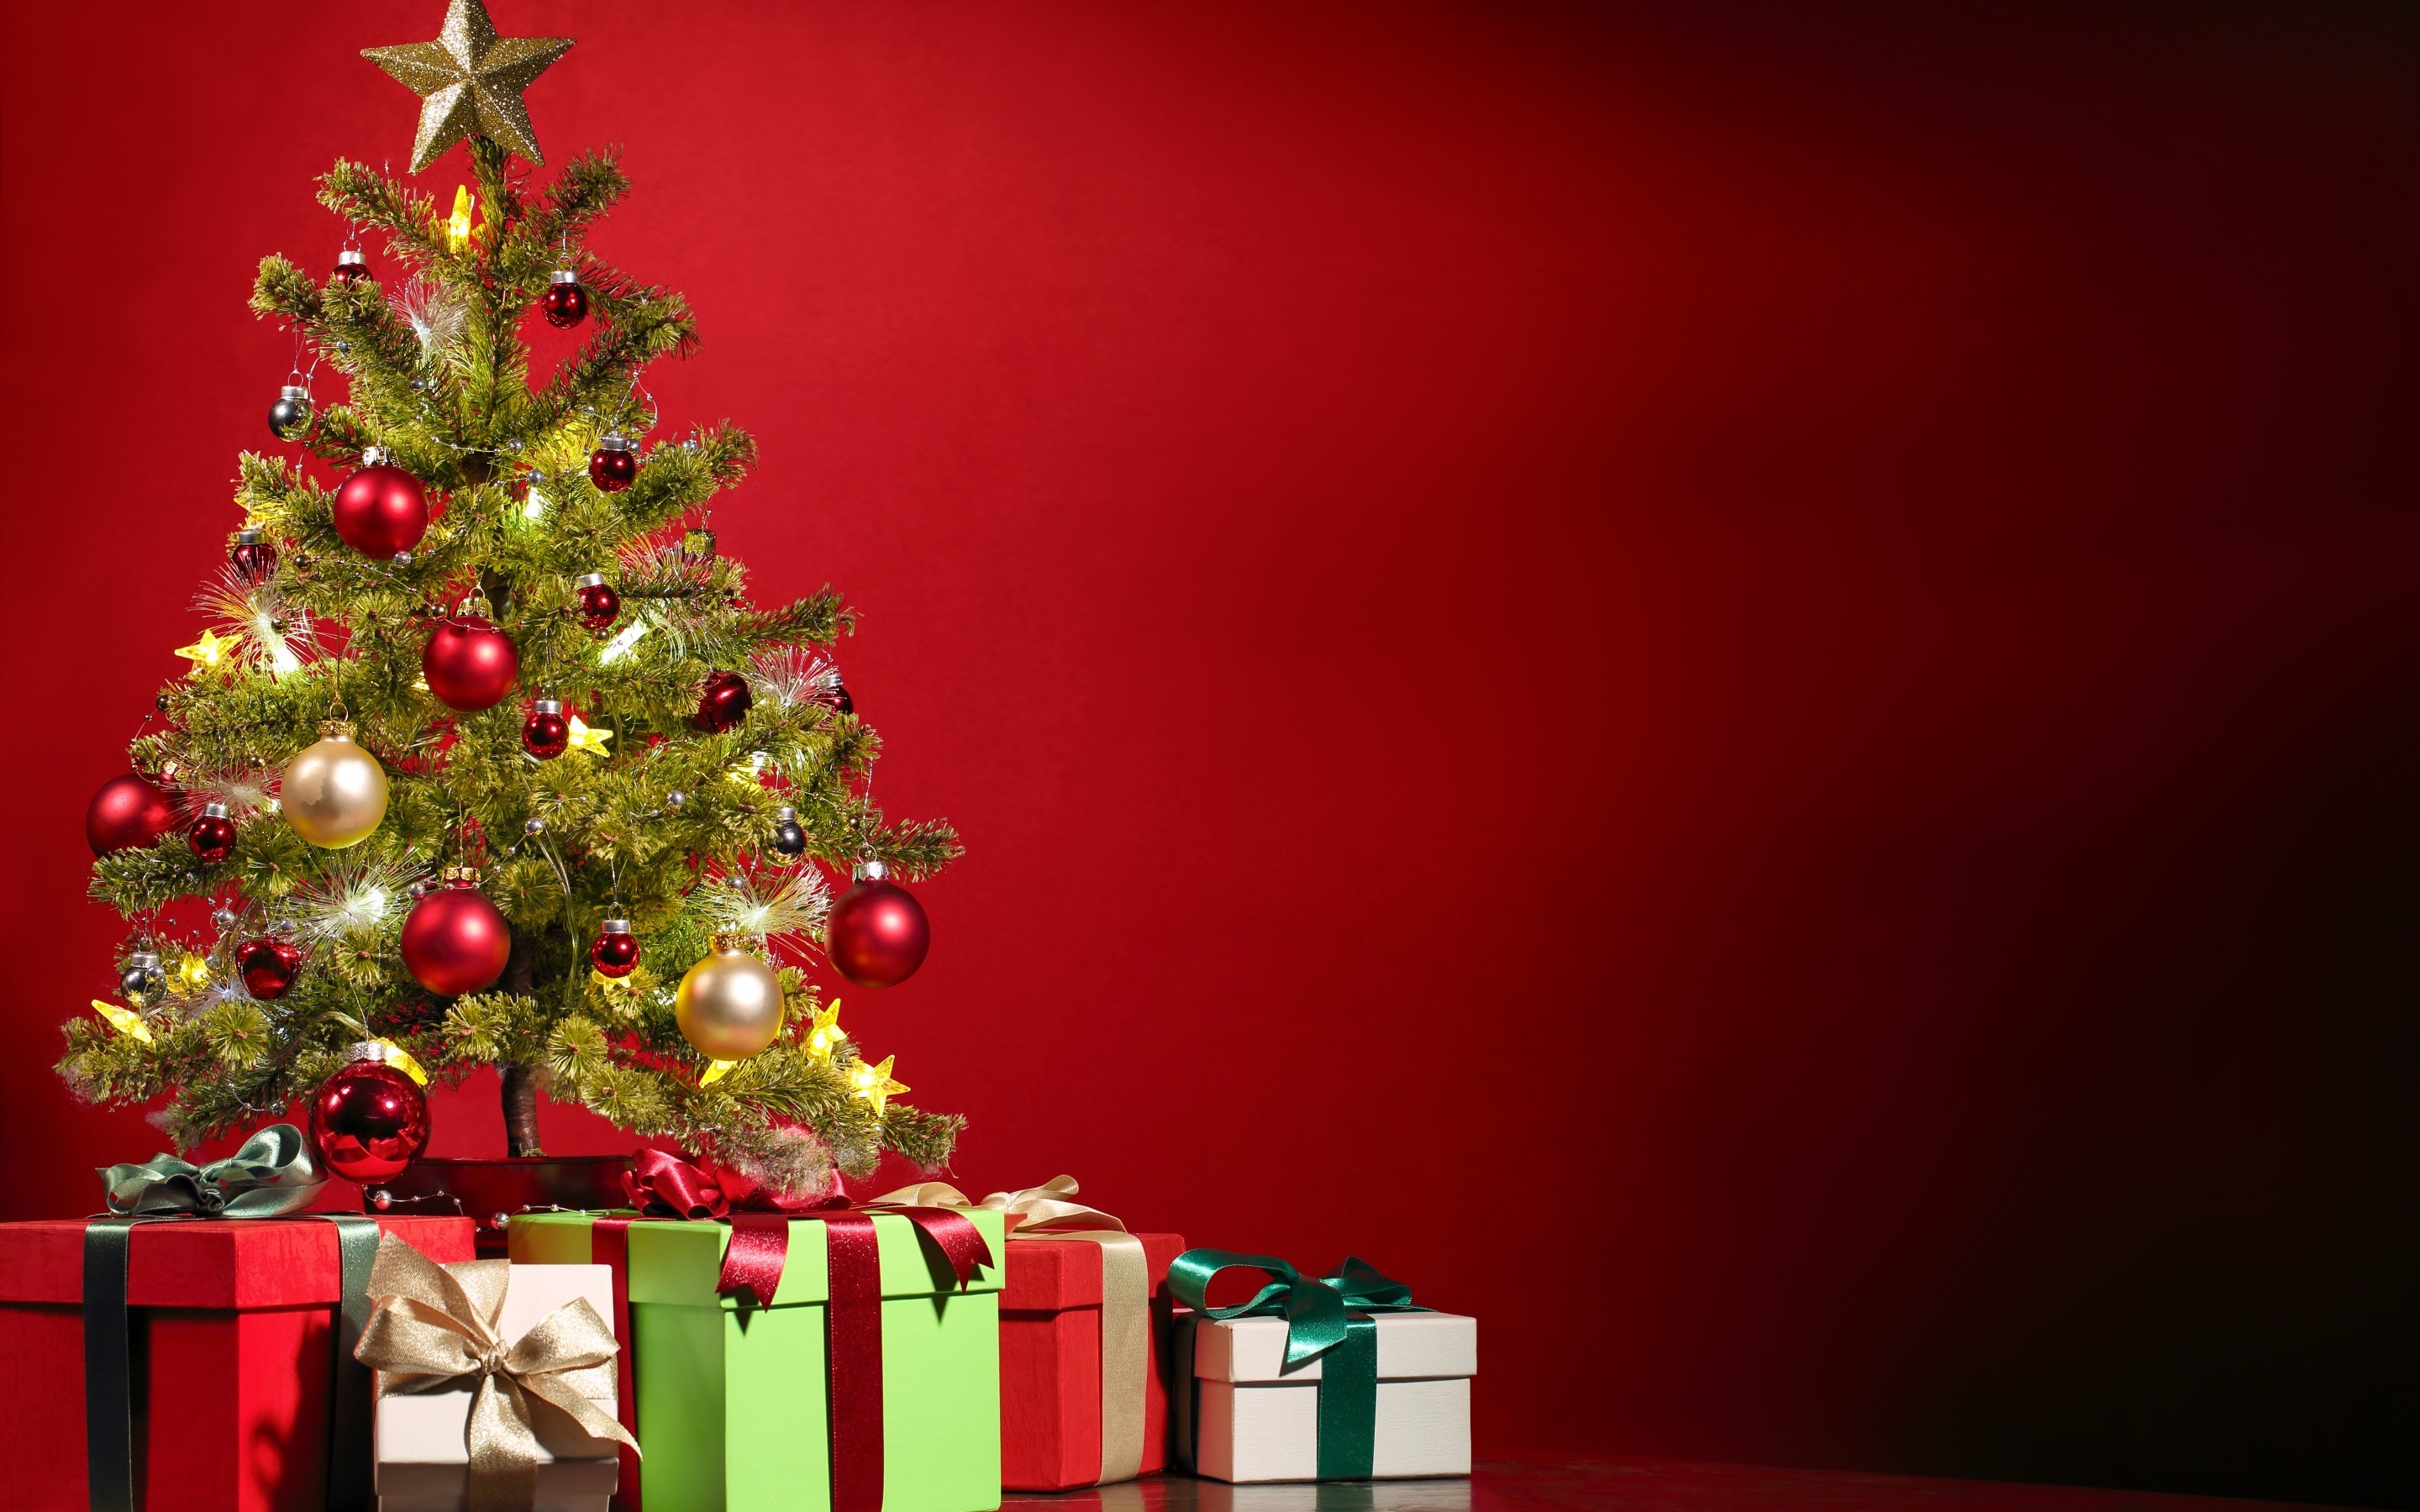 Special Christmas Tree and Gifts for 2880 x 1800 Retina Display resolution